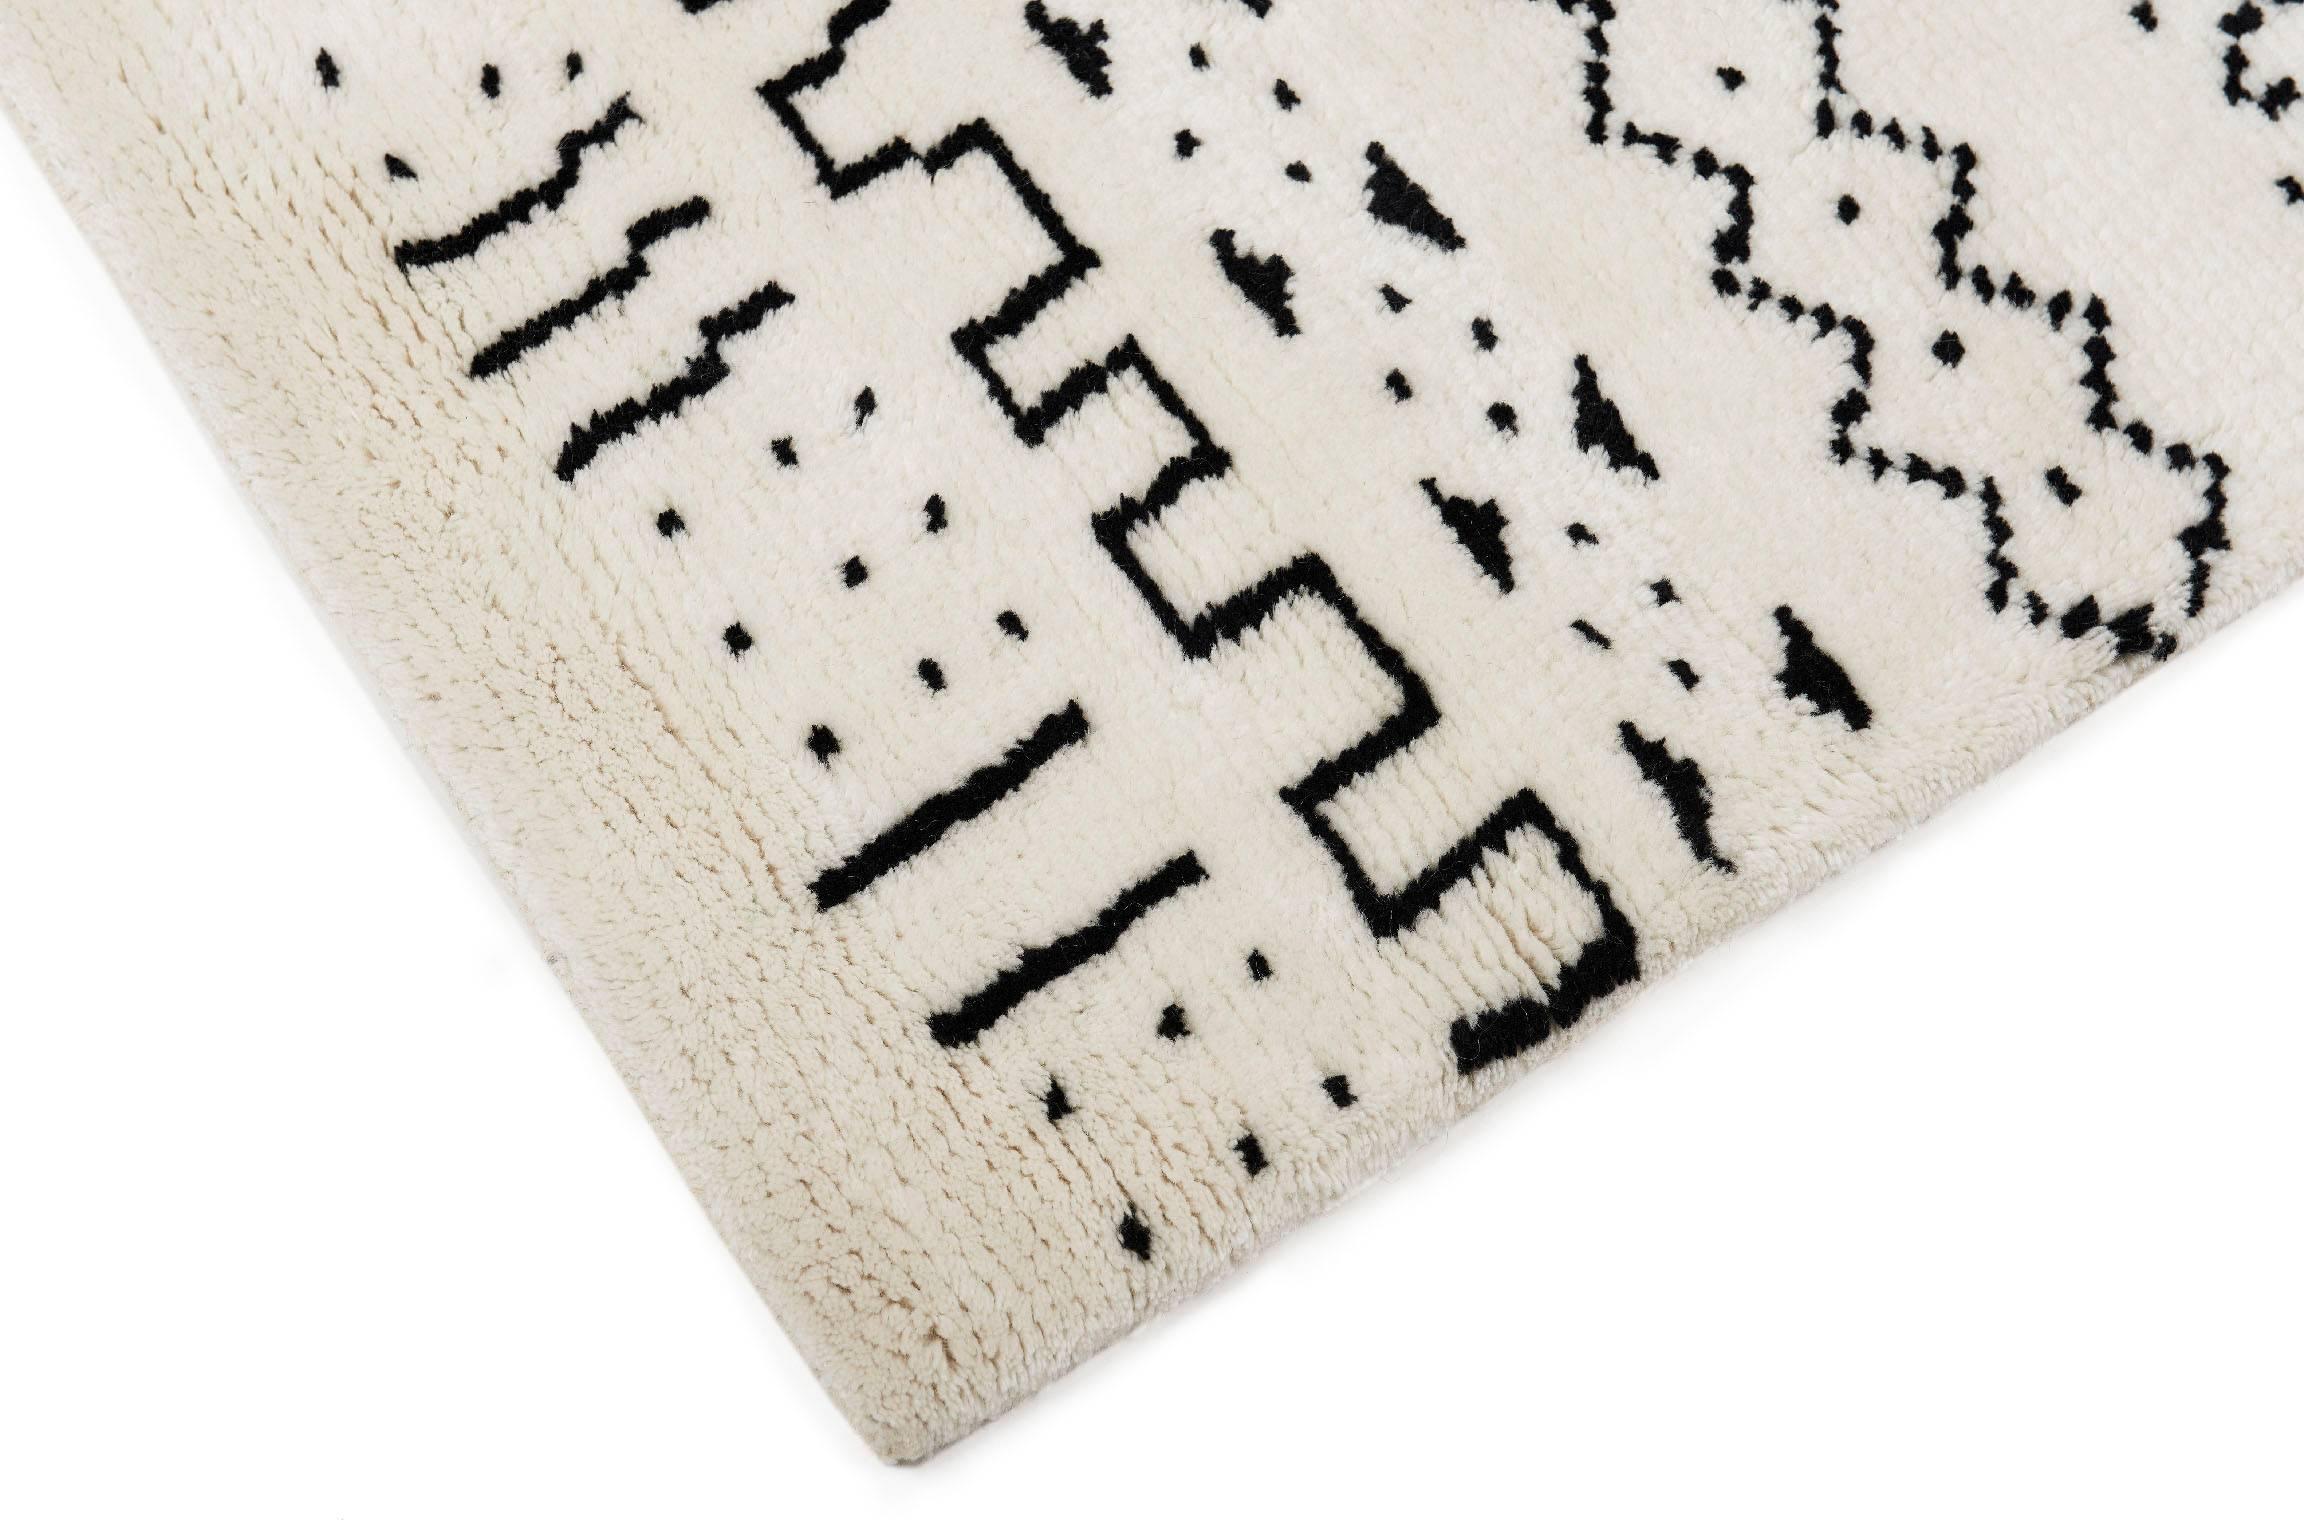 The ultimate rug for lounging, reading, or sleeping. The Bintou black and white rug is hand-knotted with 100% high quality New Zealand wool. Super soft and plush with a Moroccan Inspired design. Designed by Aelfie.